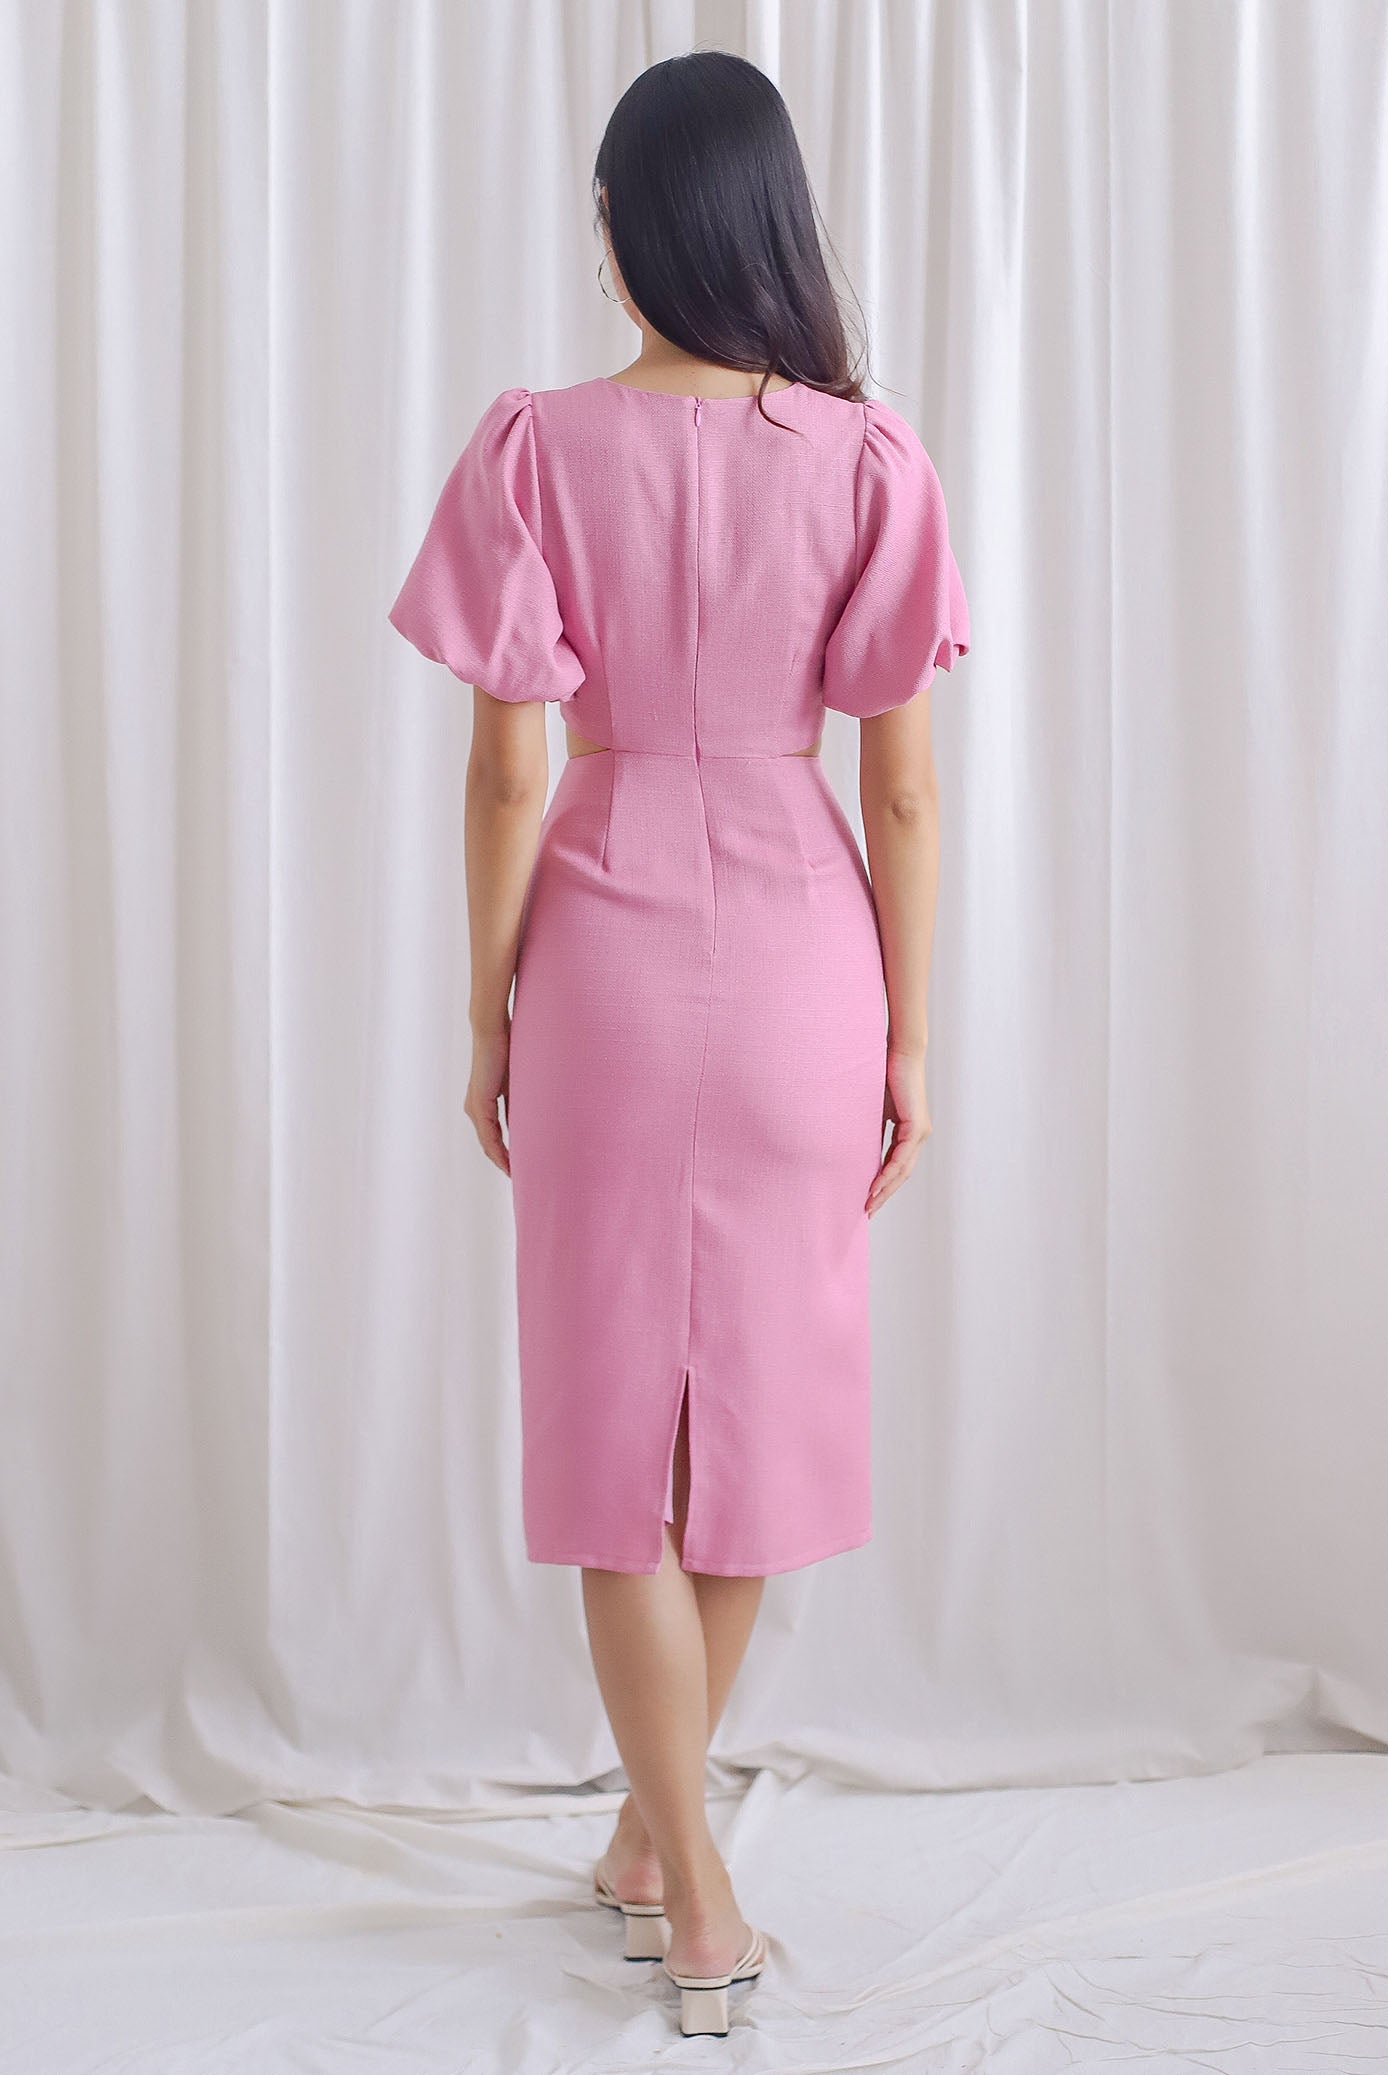 Moritz Tweed Puffy Sleeve Twist Knot Cut Out Dress In Pink